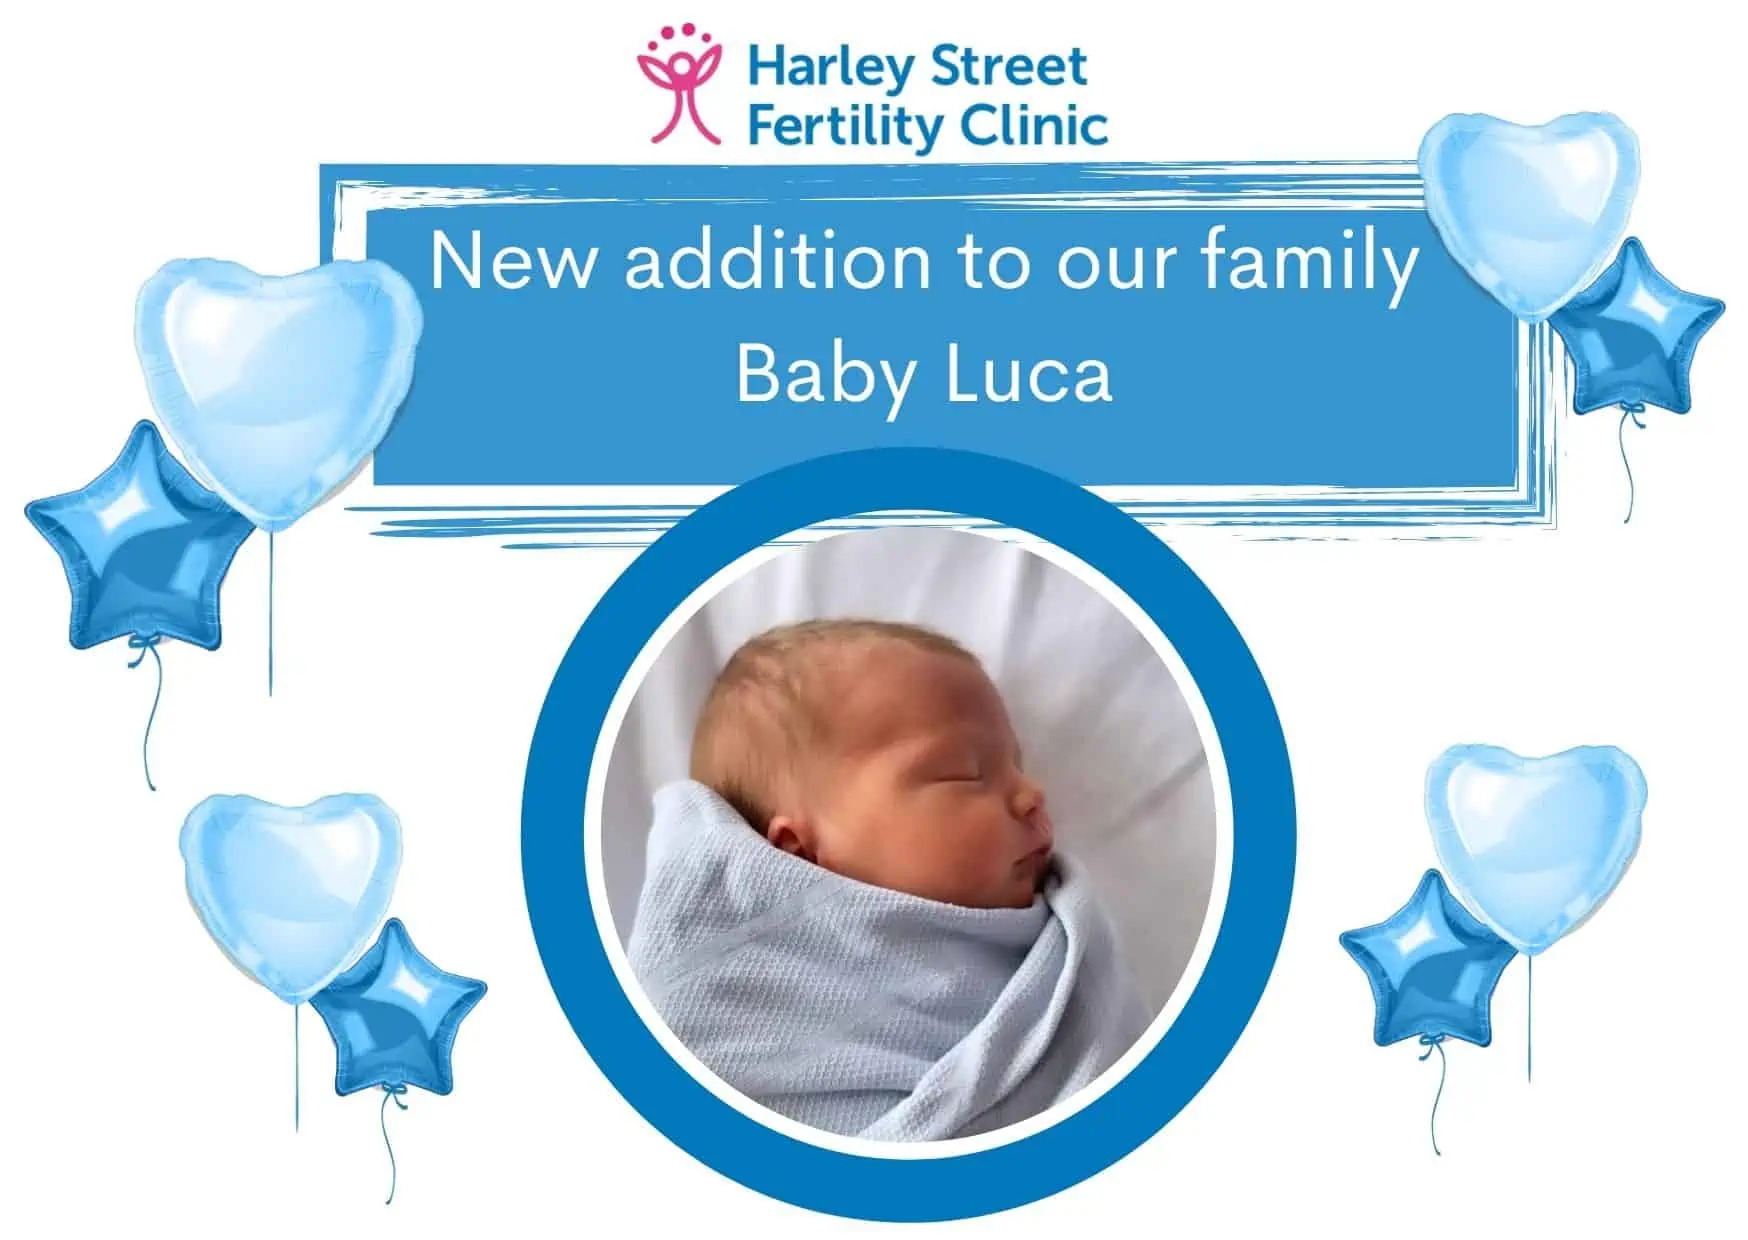 A new addition to our family: baby Luca